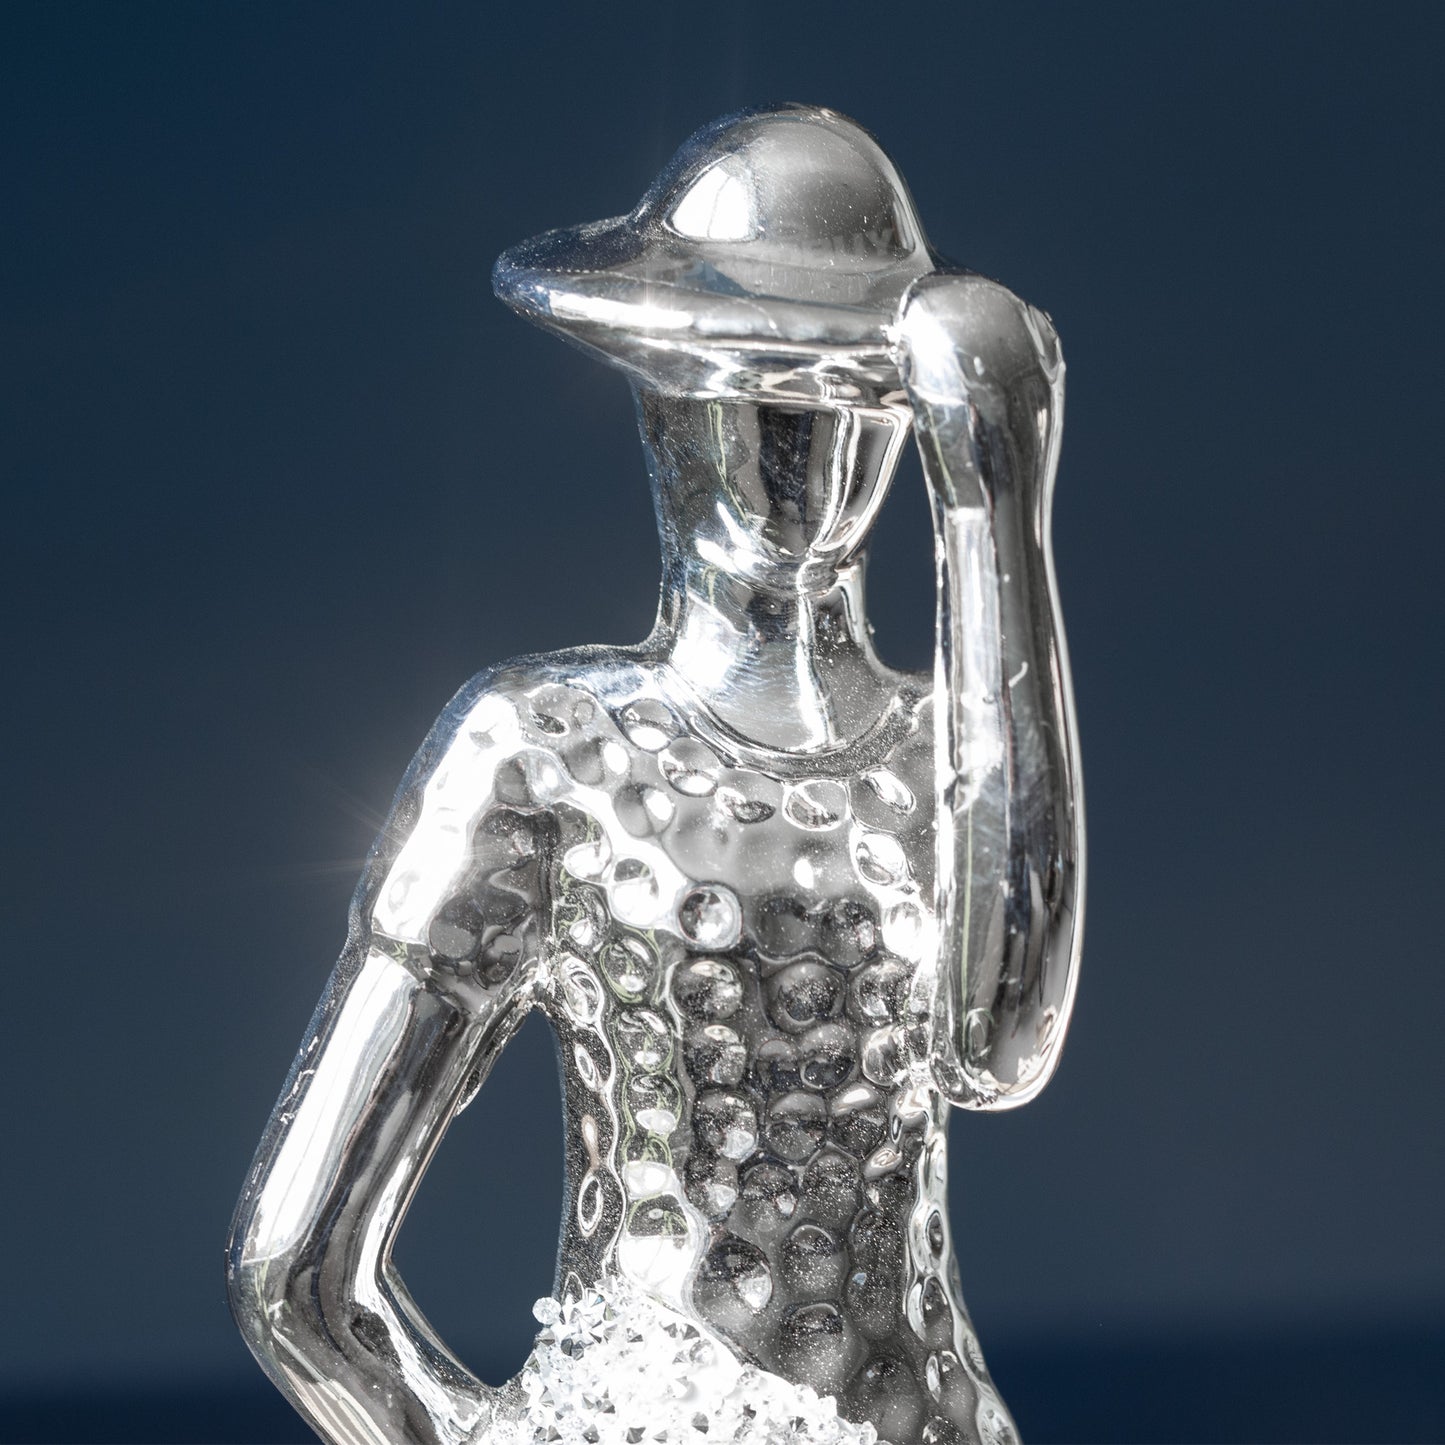 Silver Lady 'Hand on Hat' 29.5cm Tall Ornament